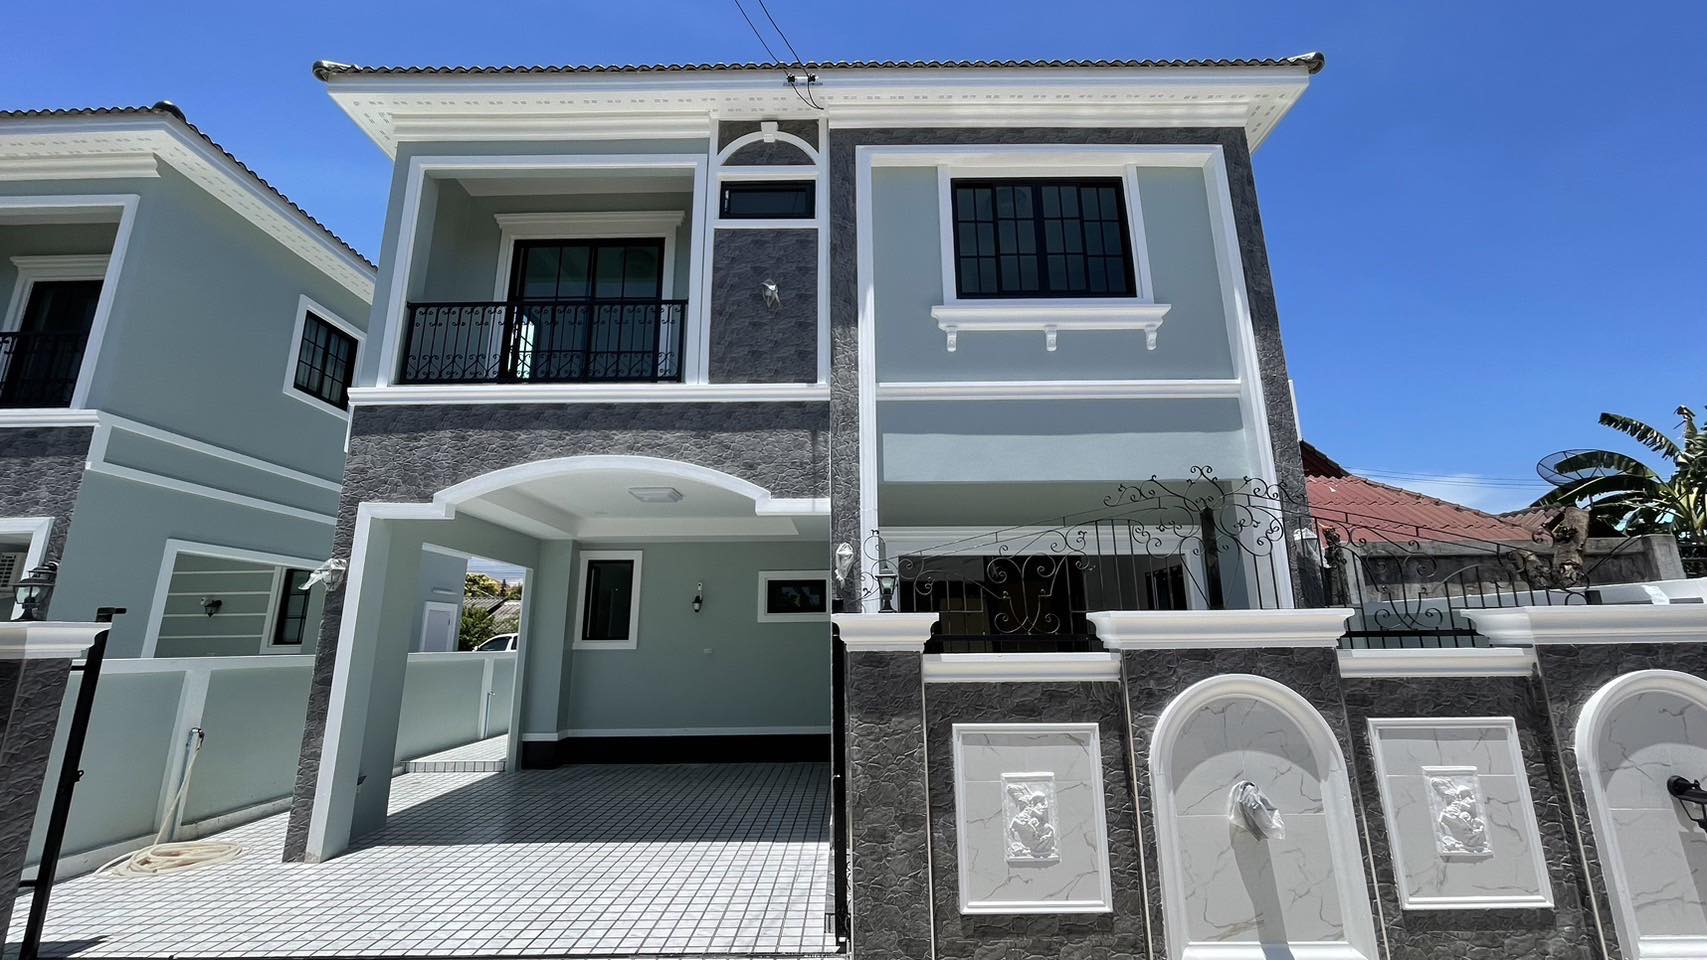 Thanyawarin Project, Phase 3. New 3 bedrooms house in North Pattaya